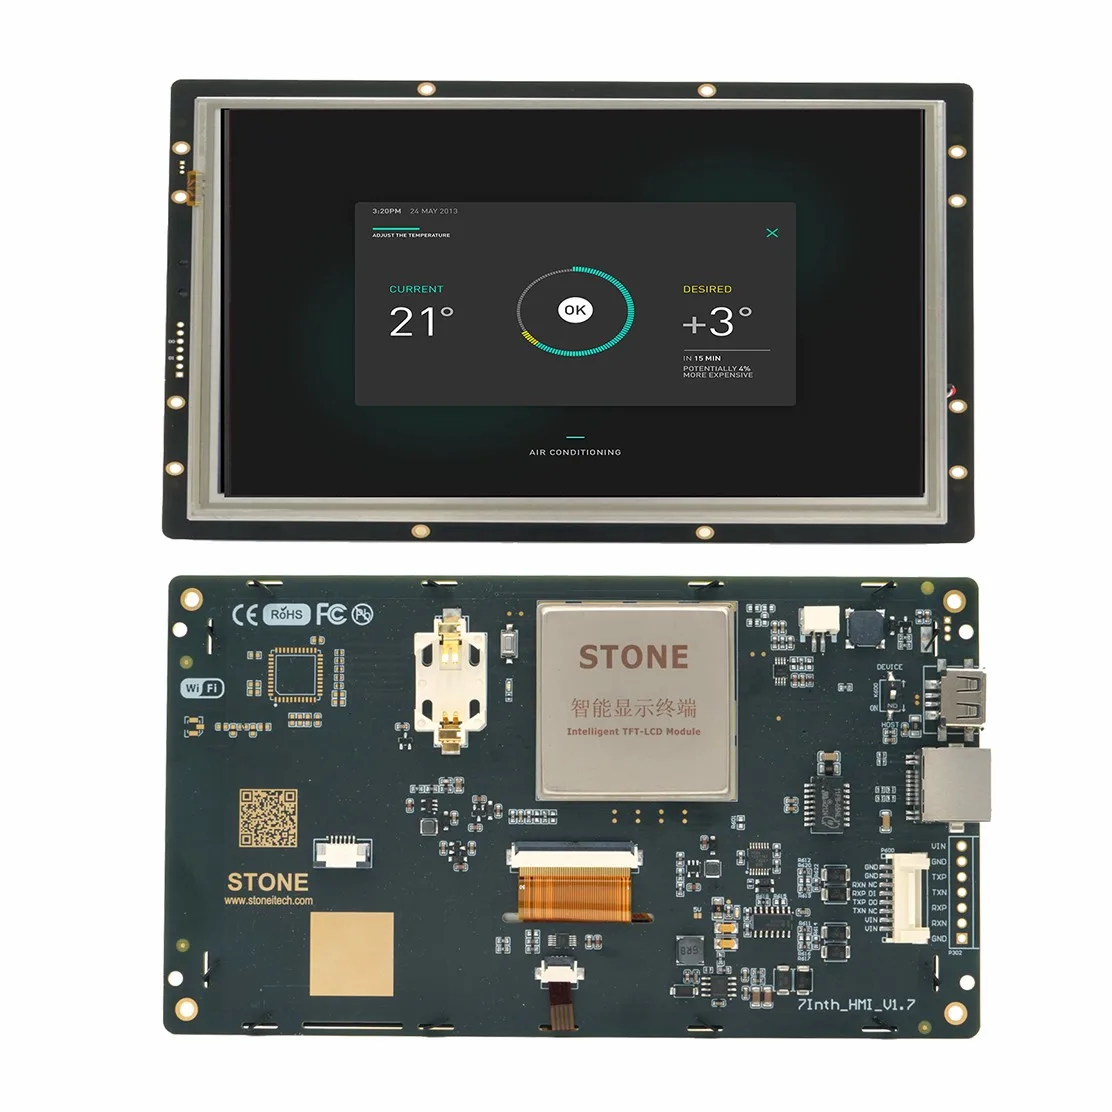 7.0 Industry Smart HMI TFT Driver,Flash Memory,UART port,power supply ready-made Basic Control Program and Powerful Design